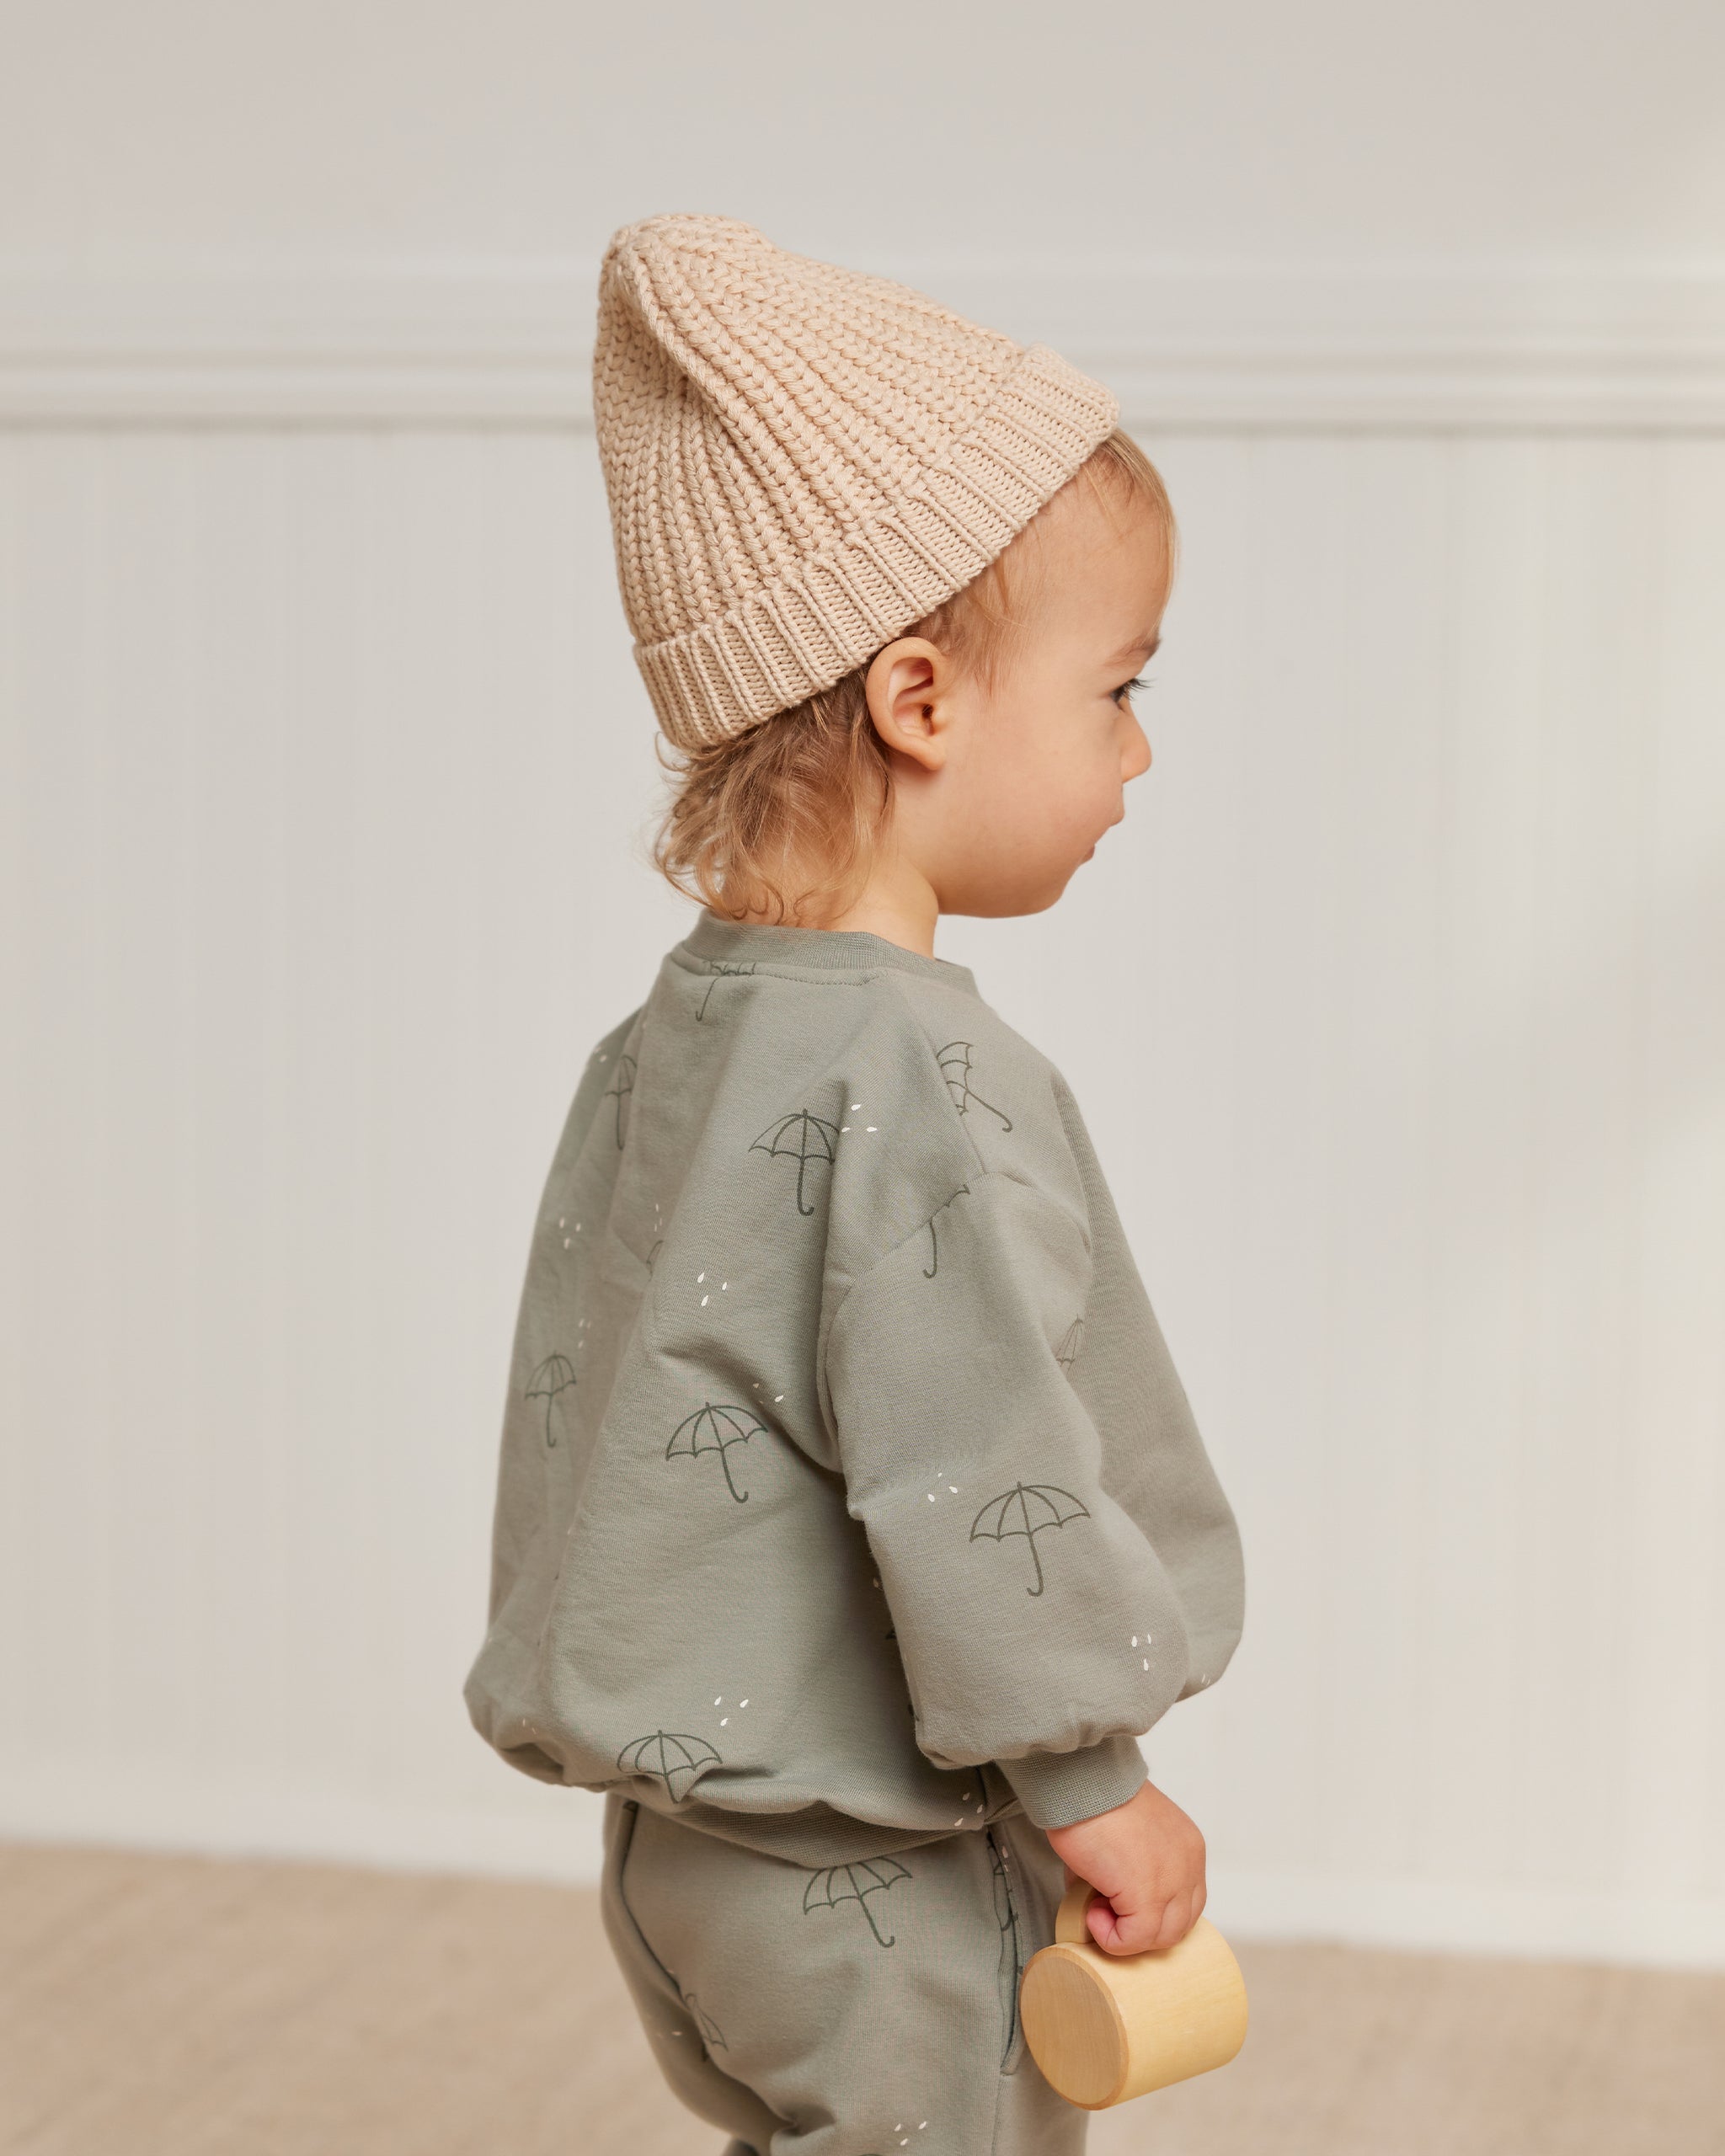 Relaxed Fleece Sweatshirt || Umbrellas - Rylee + Cru | Kids Clothes | Trendy Baby Clothes | Modern Infant Outfits |